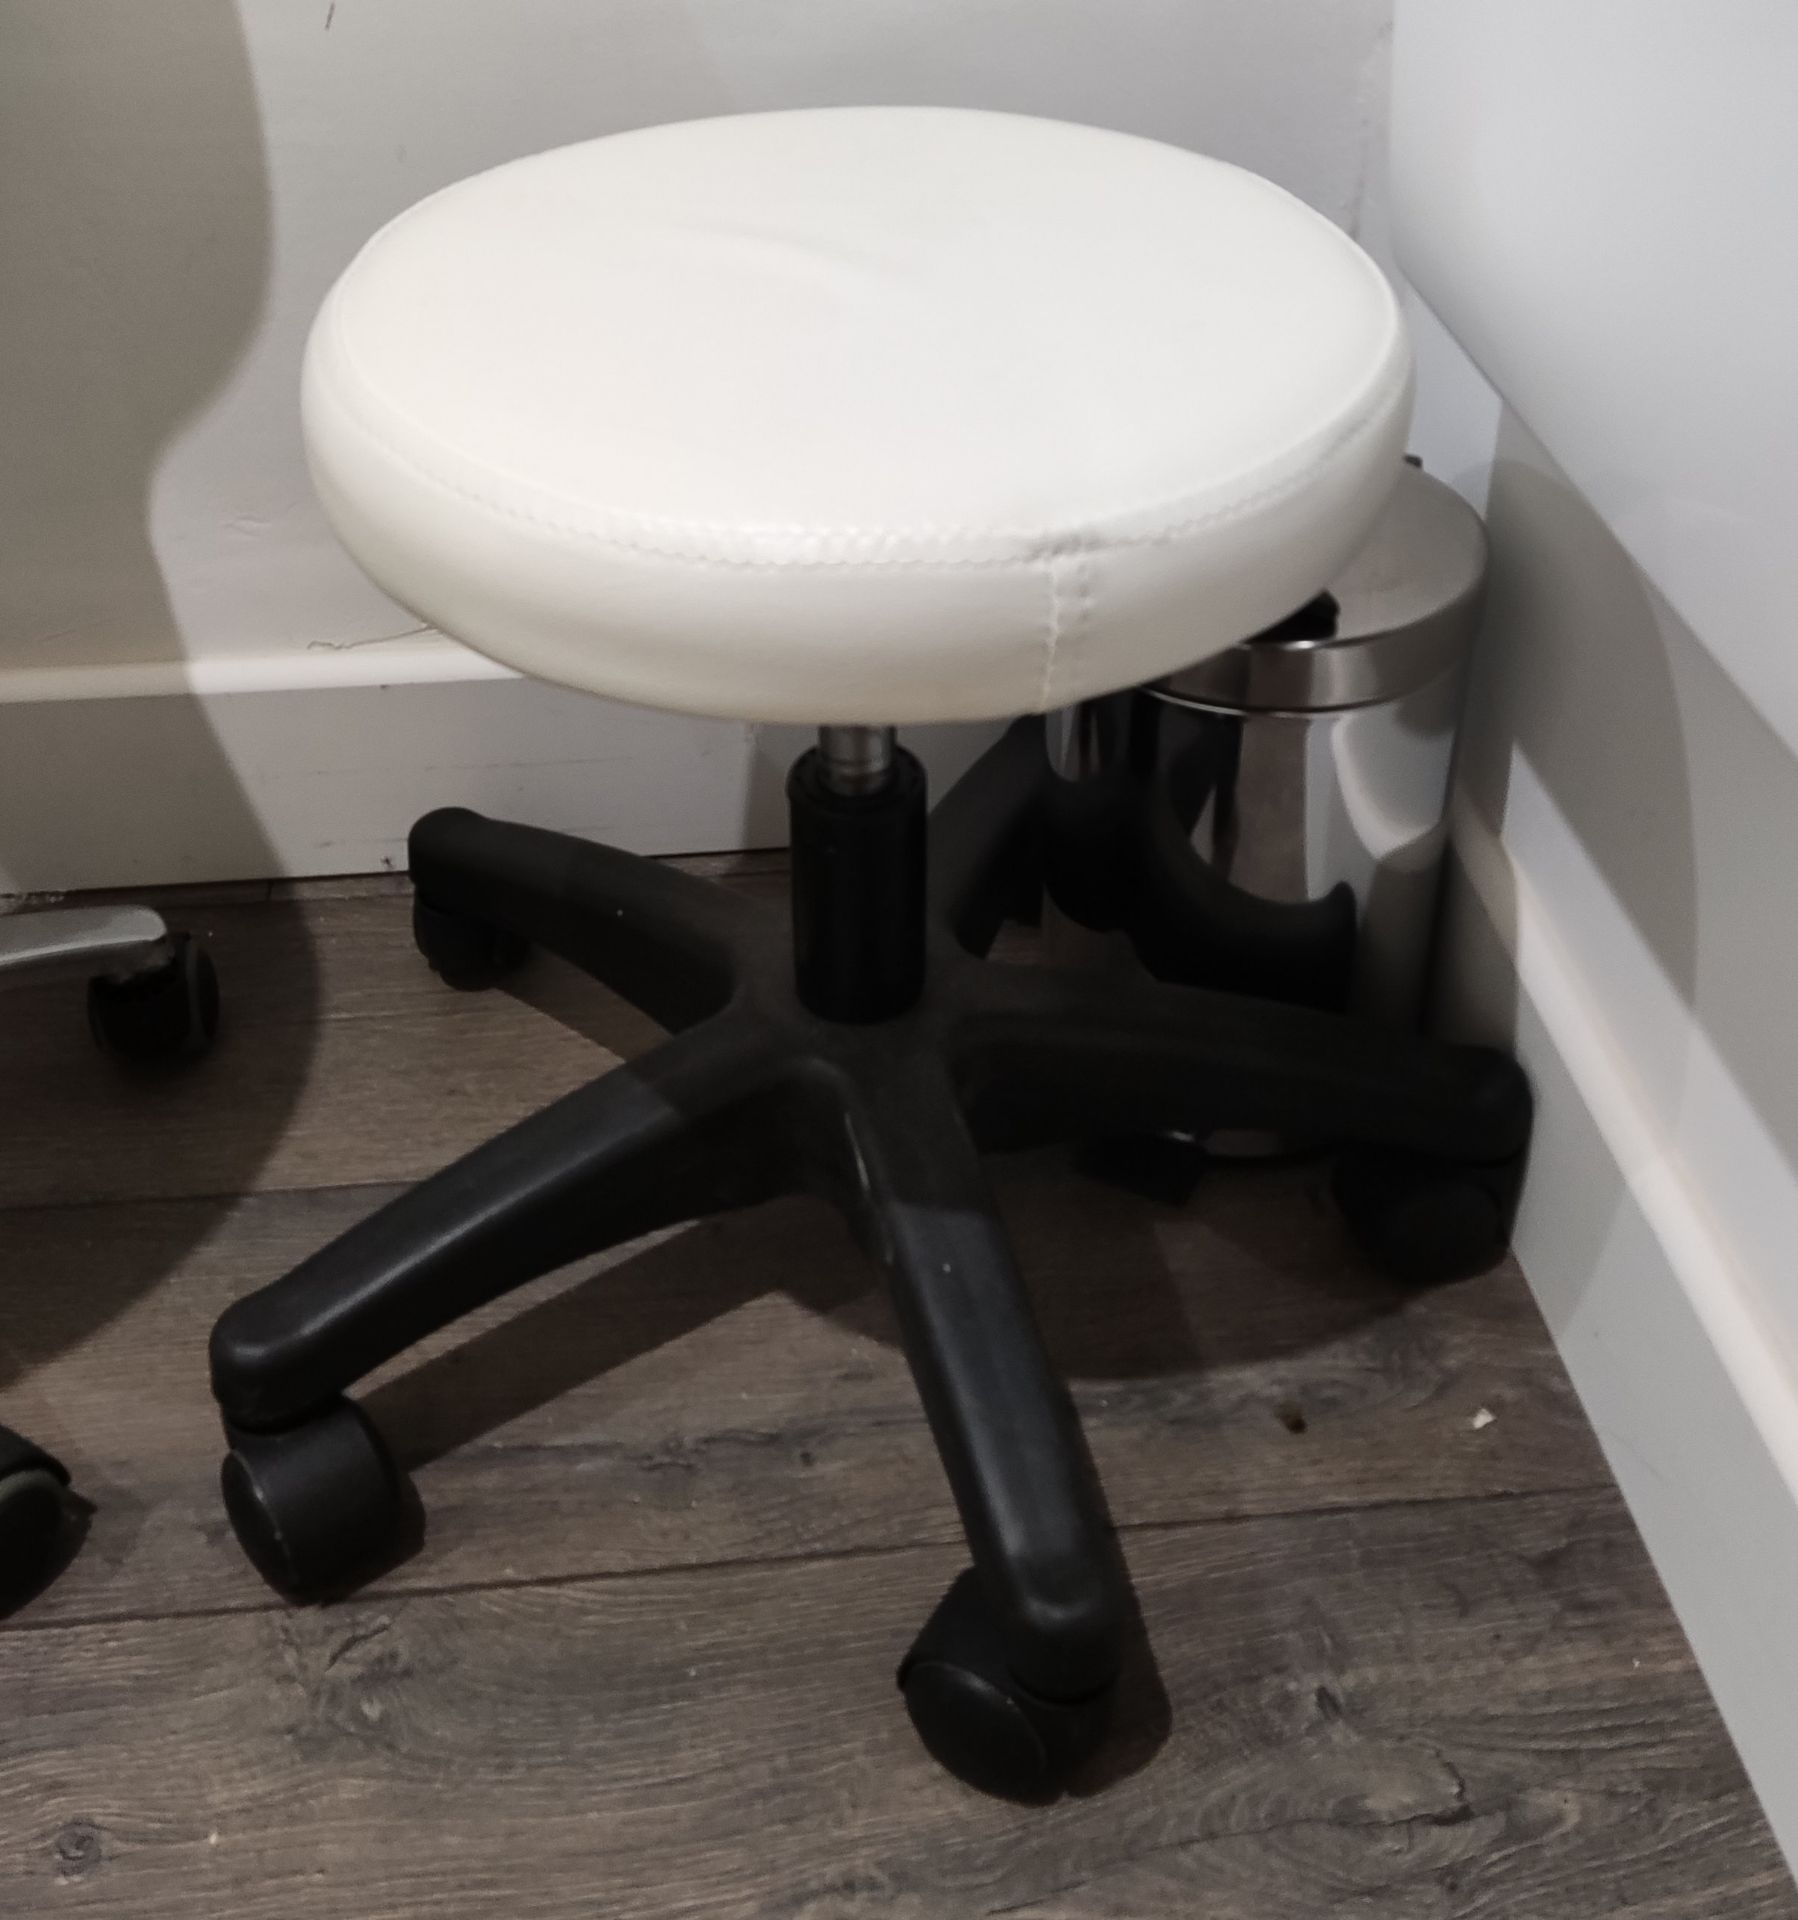 4 x Beauticians Treatment Chairs / Stools - Includes 2 Stools and 2 Seats - LBC103 - CL763- Location - Image 4 of 7